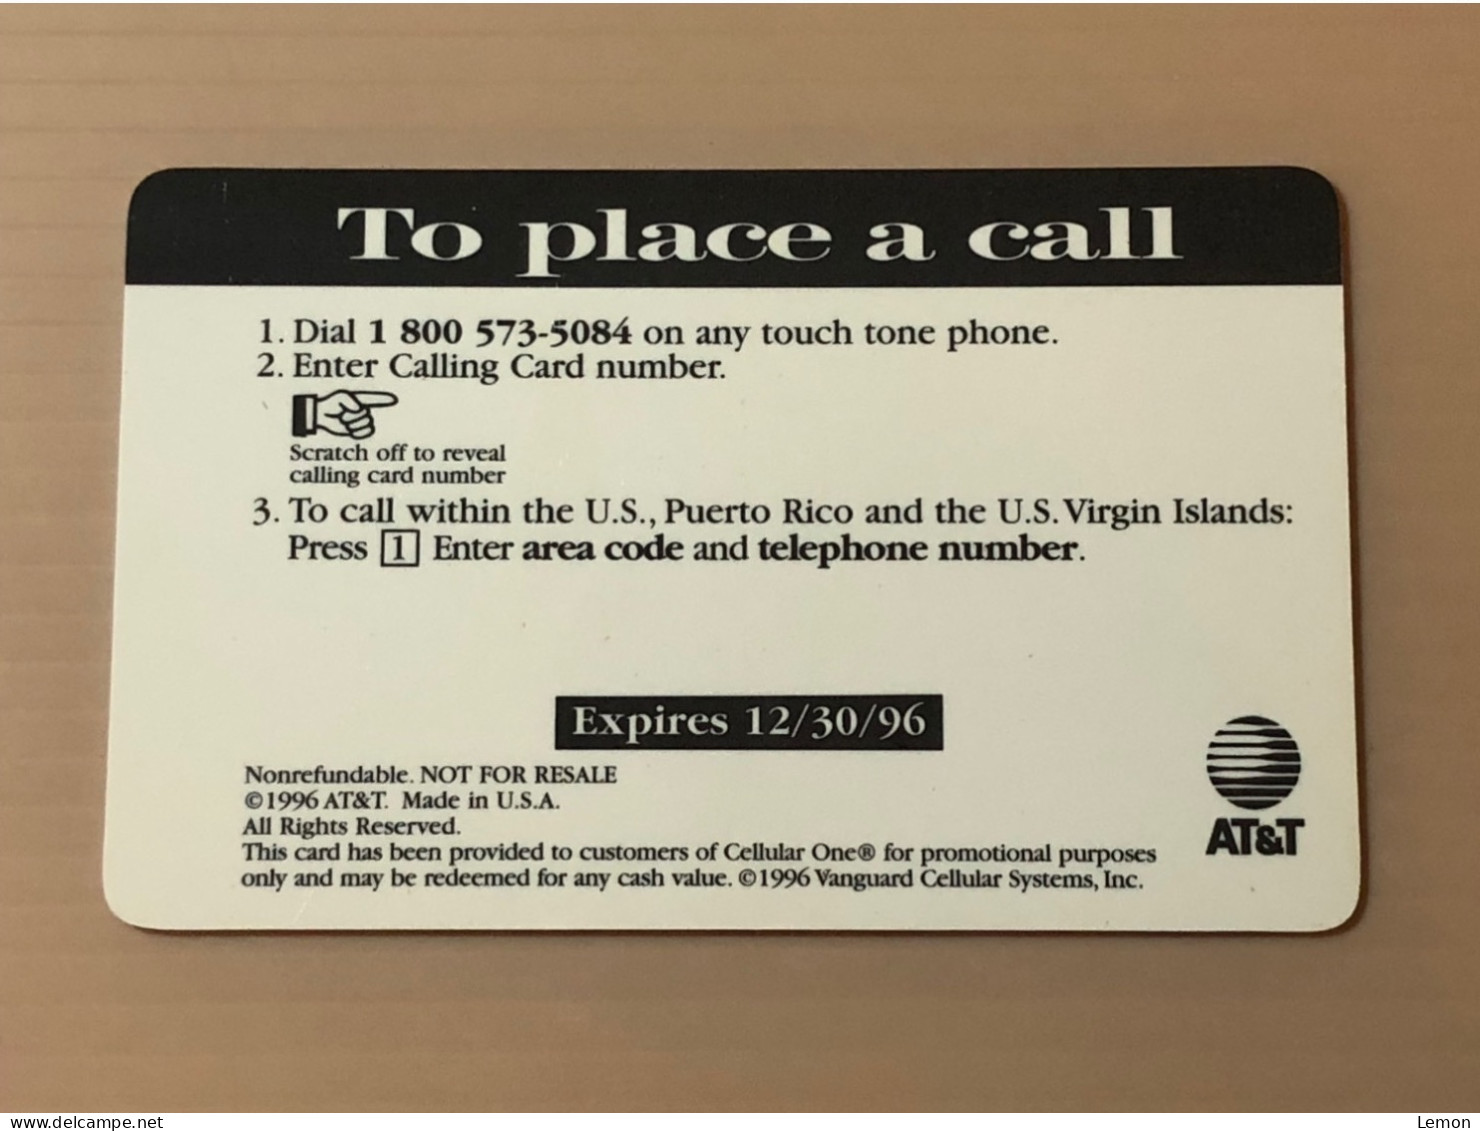 Mint USA UNITED STATES America Prepaid Telecard Phonecard, AT&T 90 CELLULAR ONE SAMPLE CARD, Set Of 1 Mint Card - Collezioni